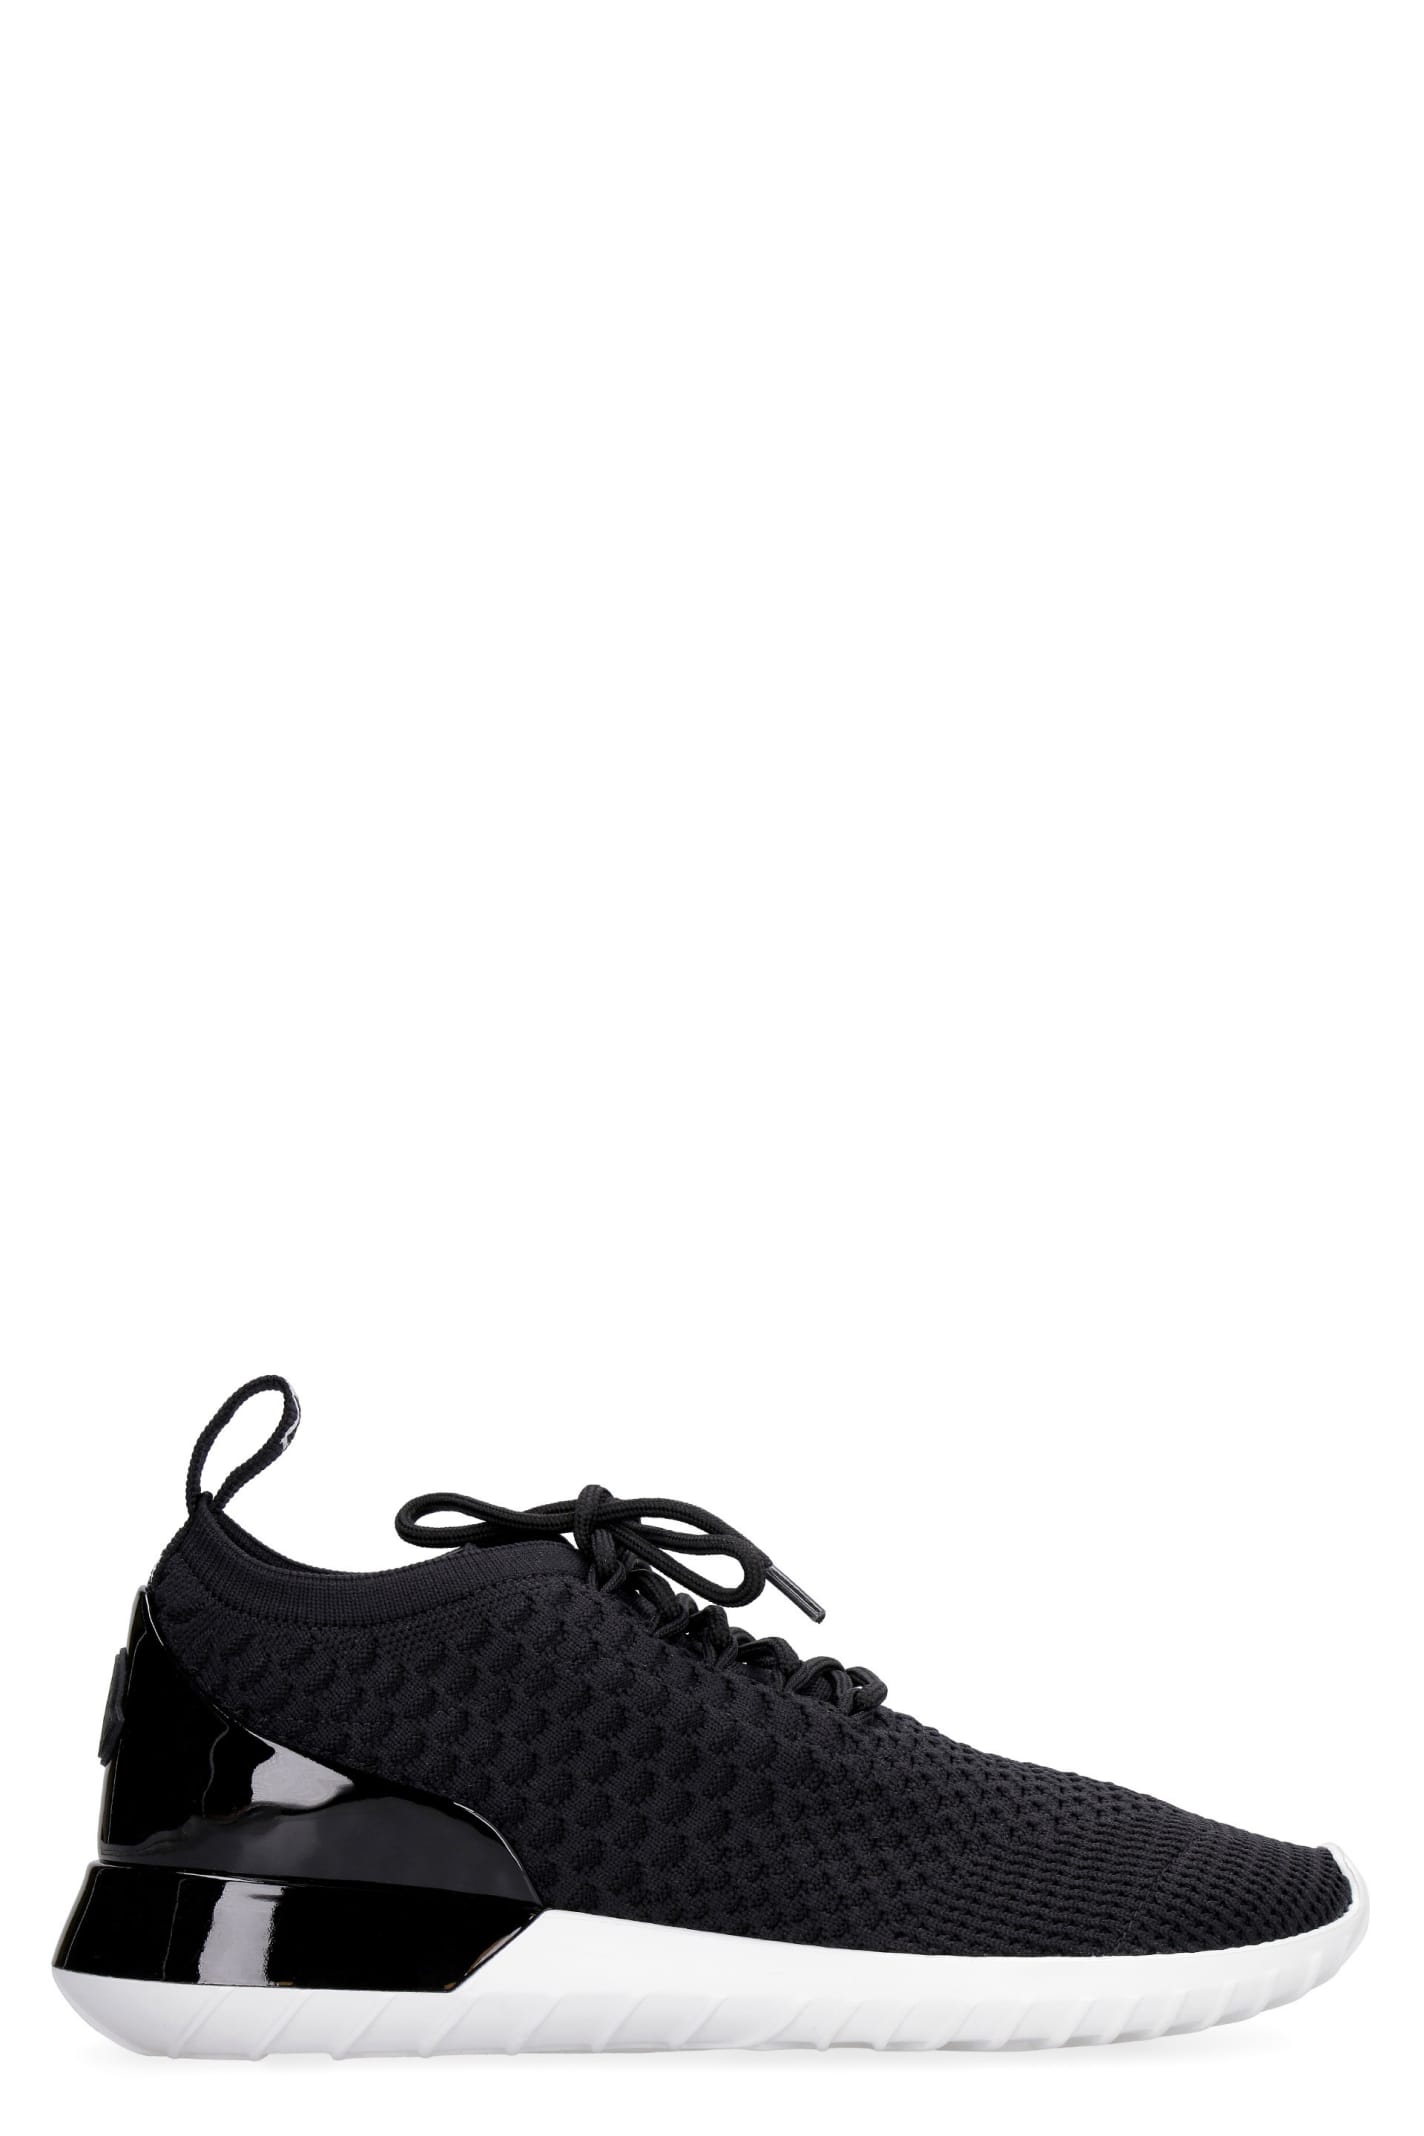 Buy Moncler Meline Fabric Low-top Sneakers online, shop Moncler shoes with free shipping